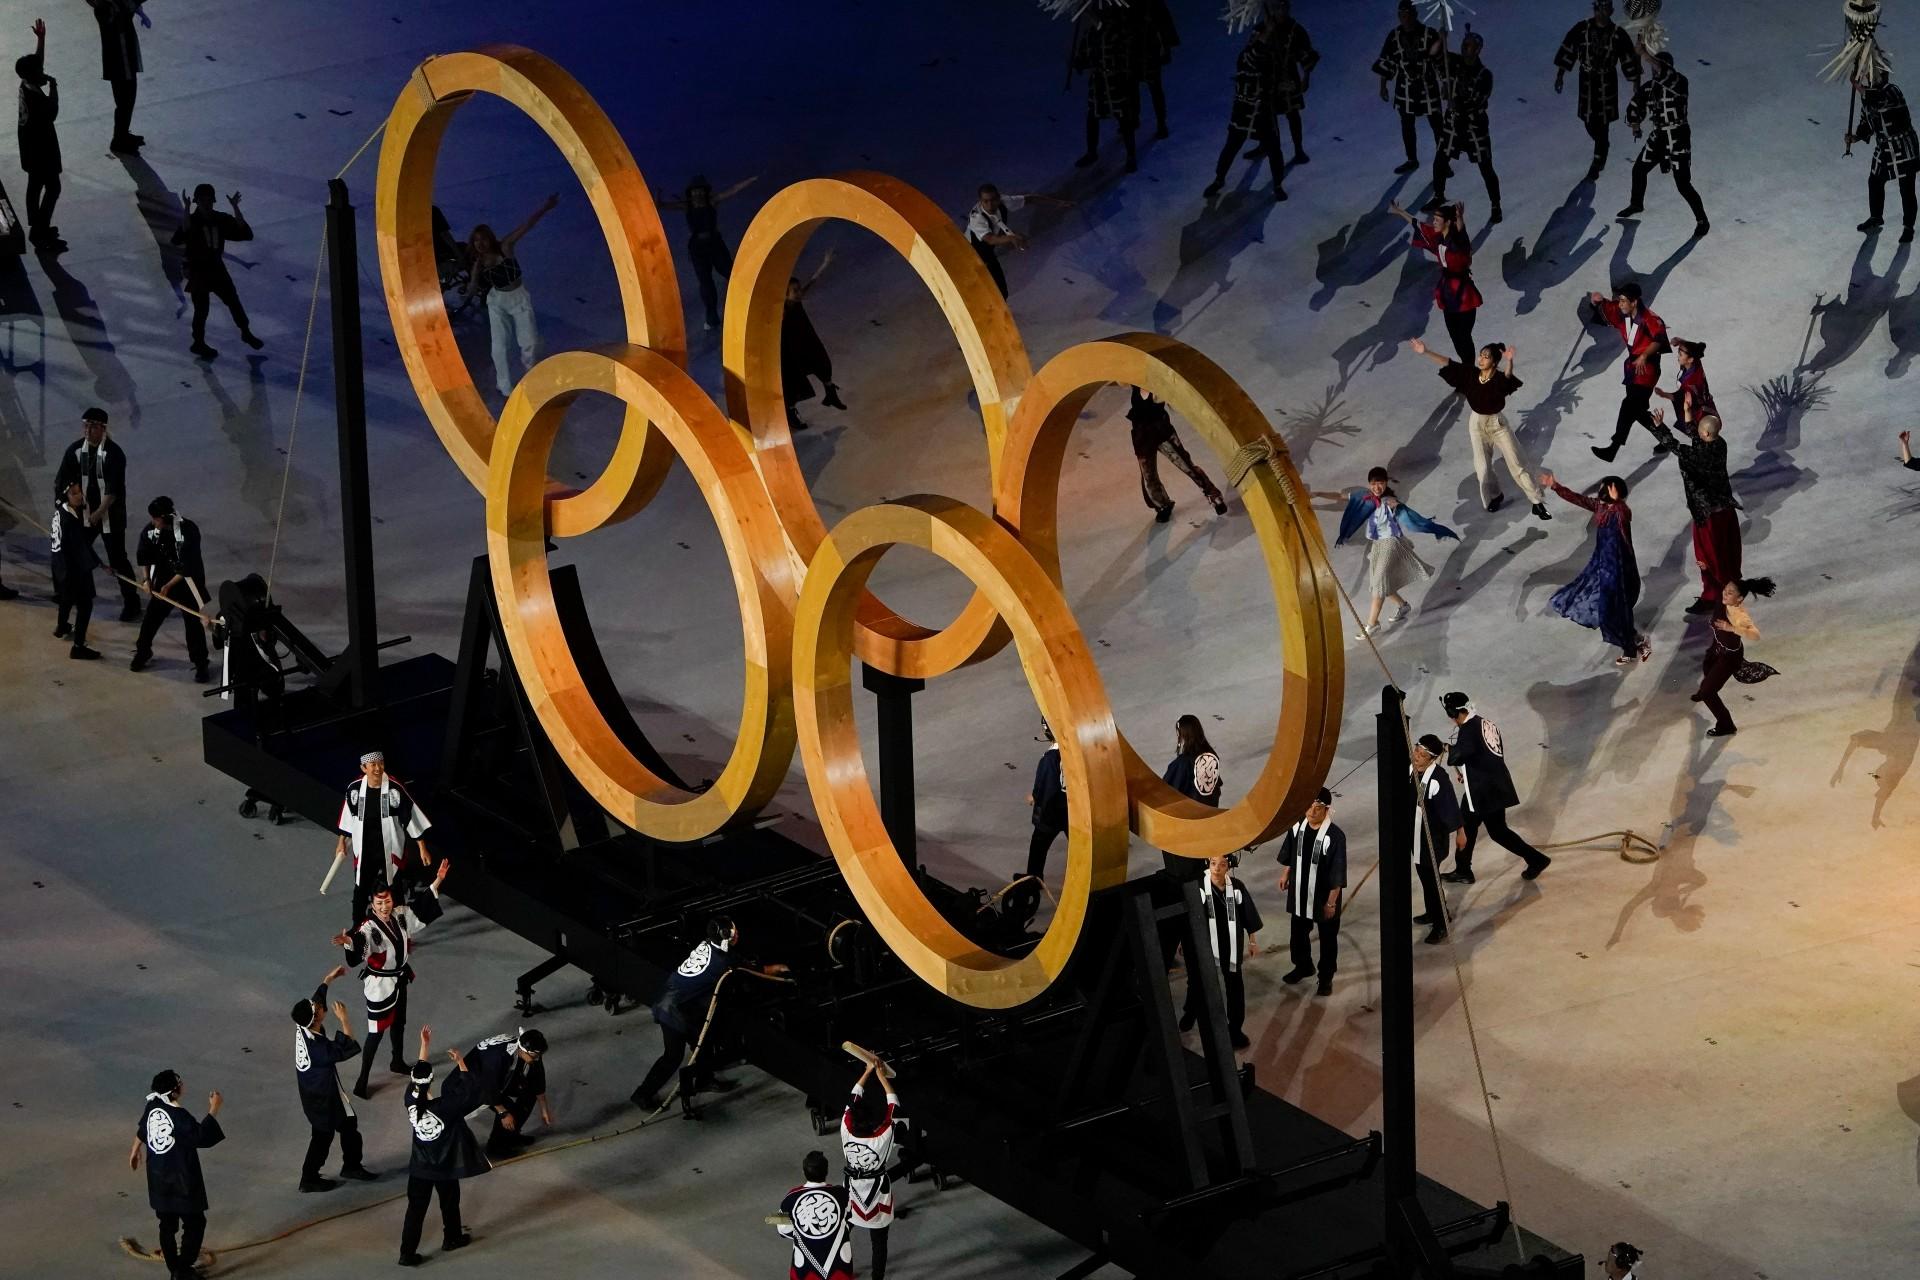 Actors perform during the opening ceremony at the Olympic Stadium at the 2020 Summer Olympics, Friday, July 23, 2021, in Tokyo. (AP Photo / Morry Gash)